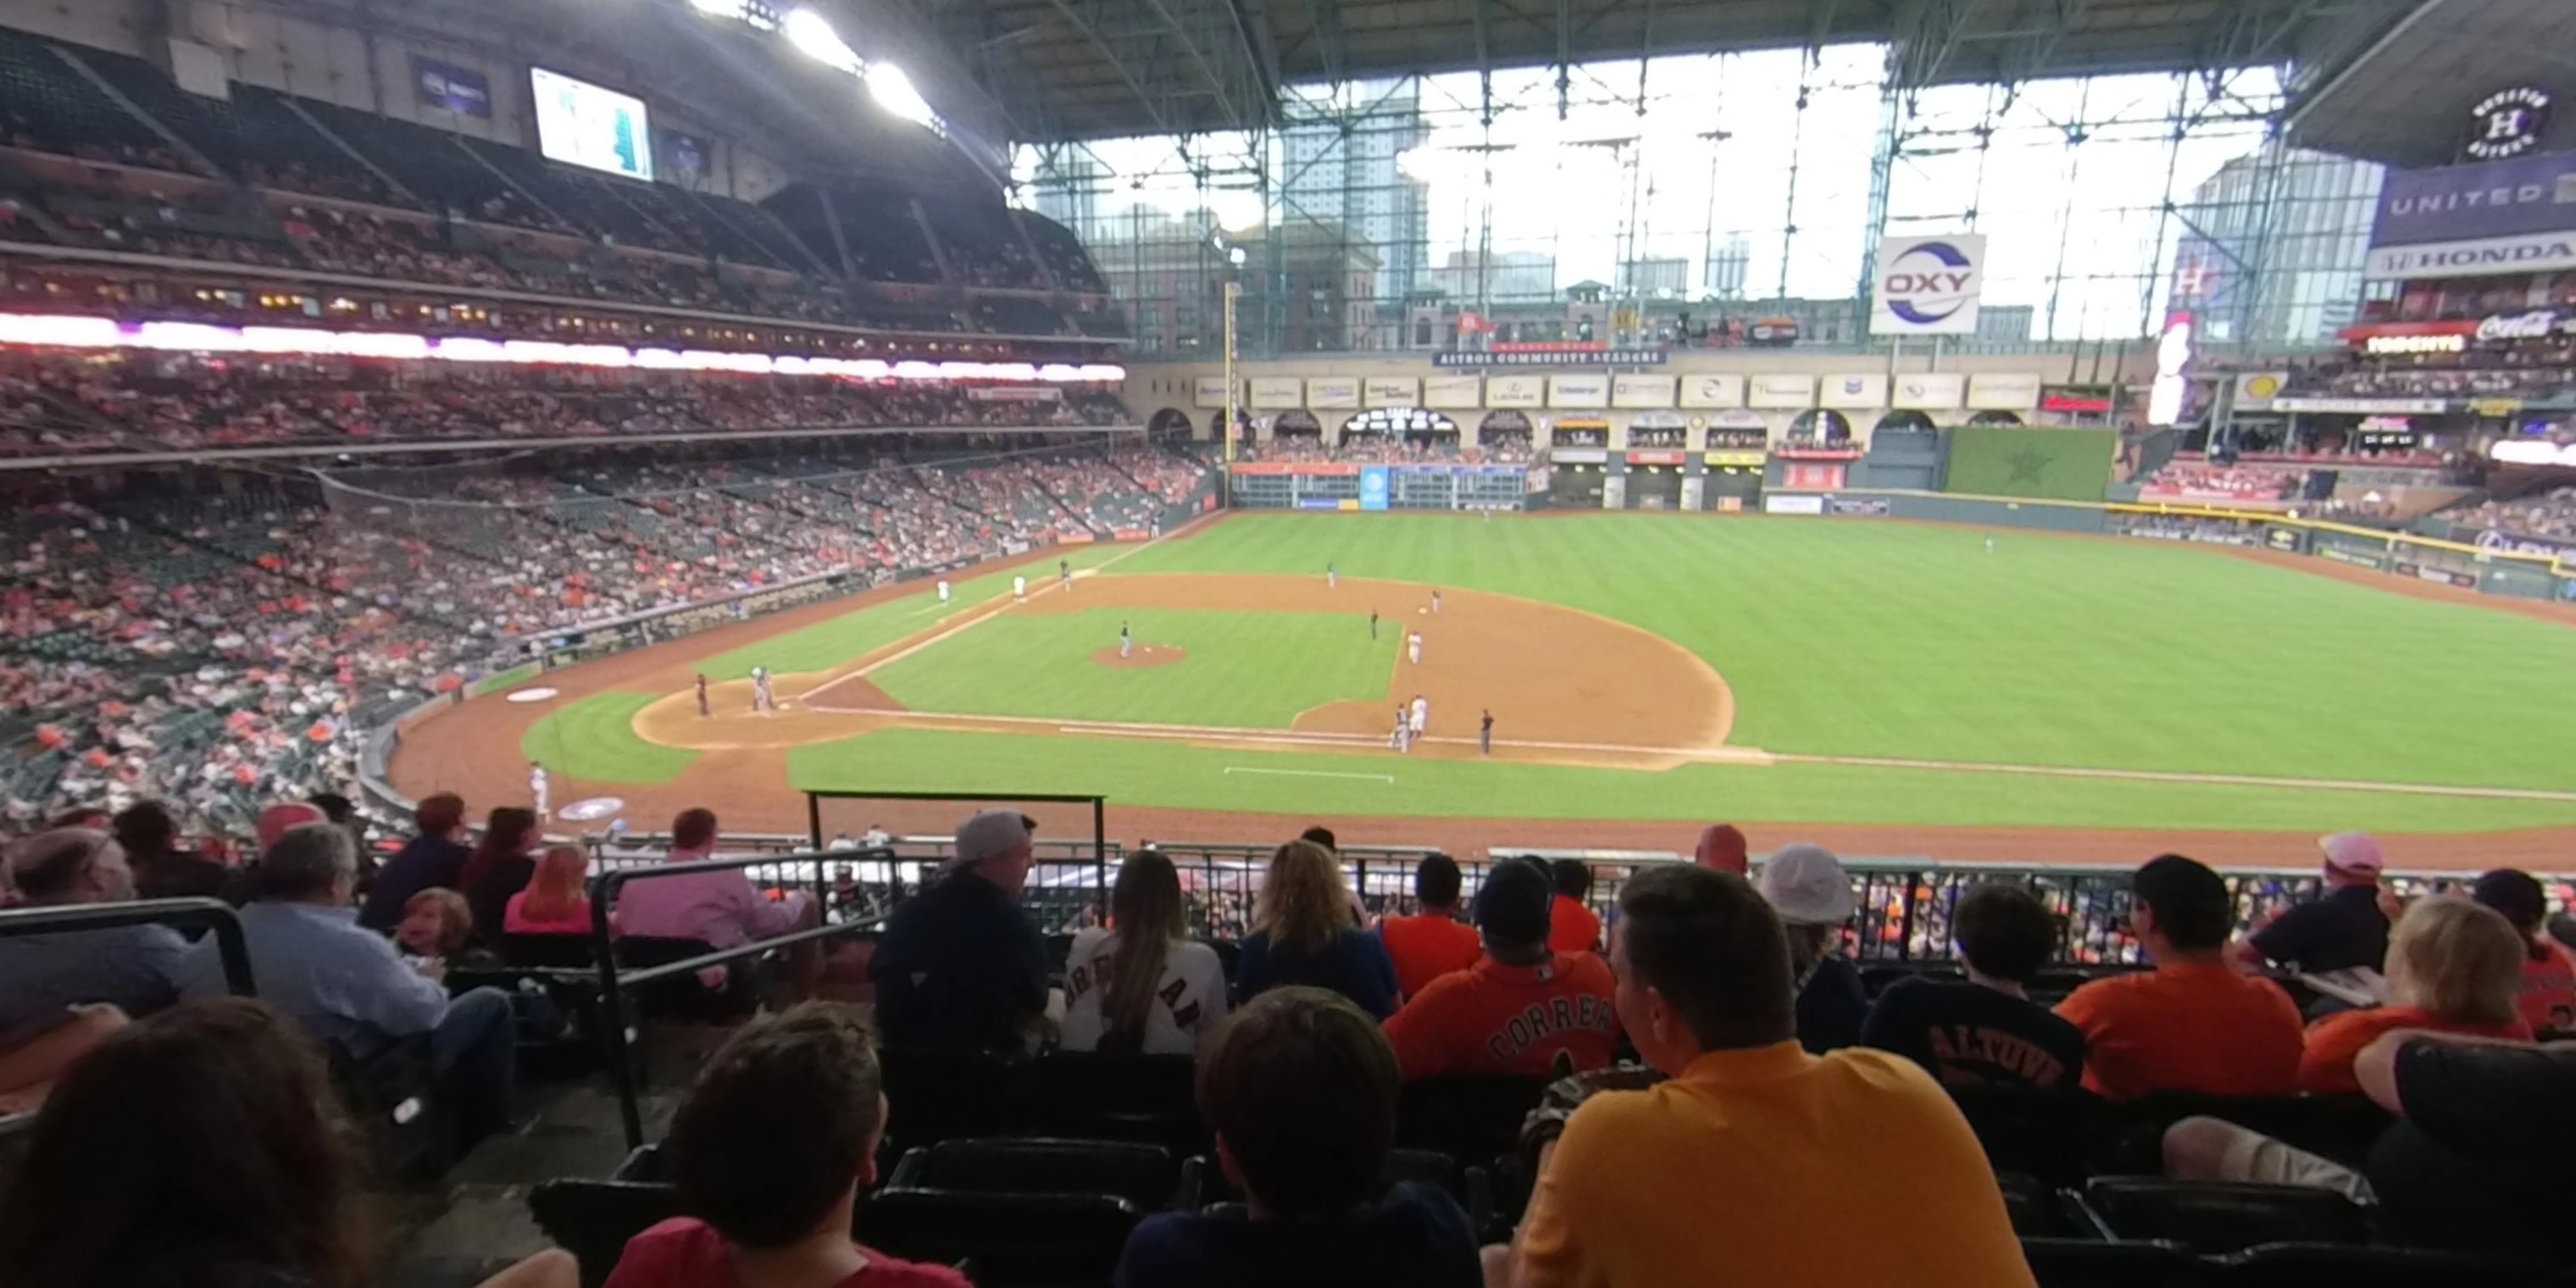 section 225 panoramic seat view  for baseball - minute maid park